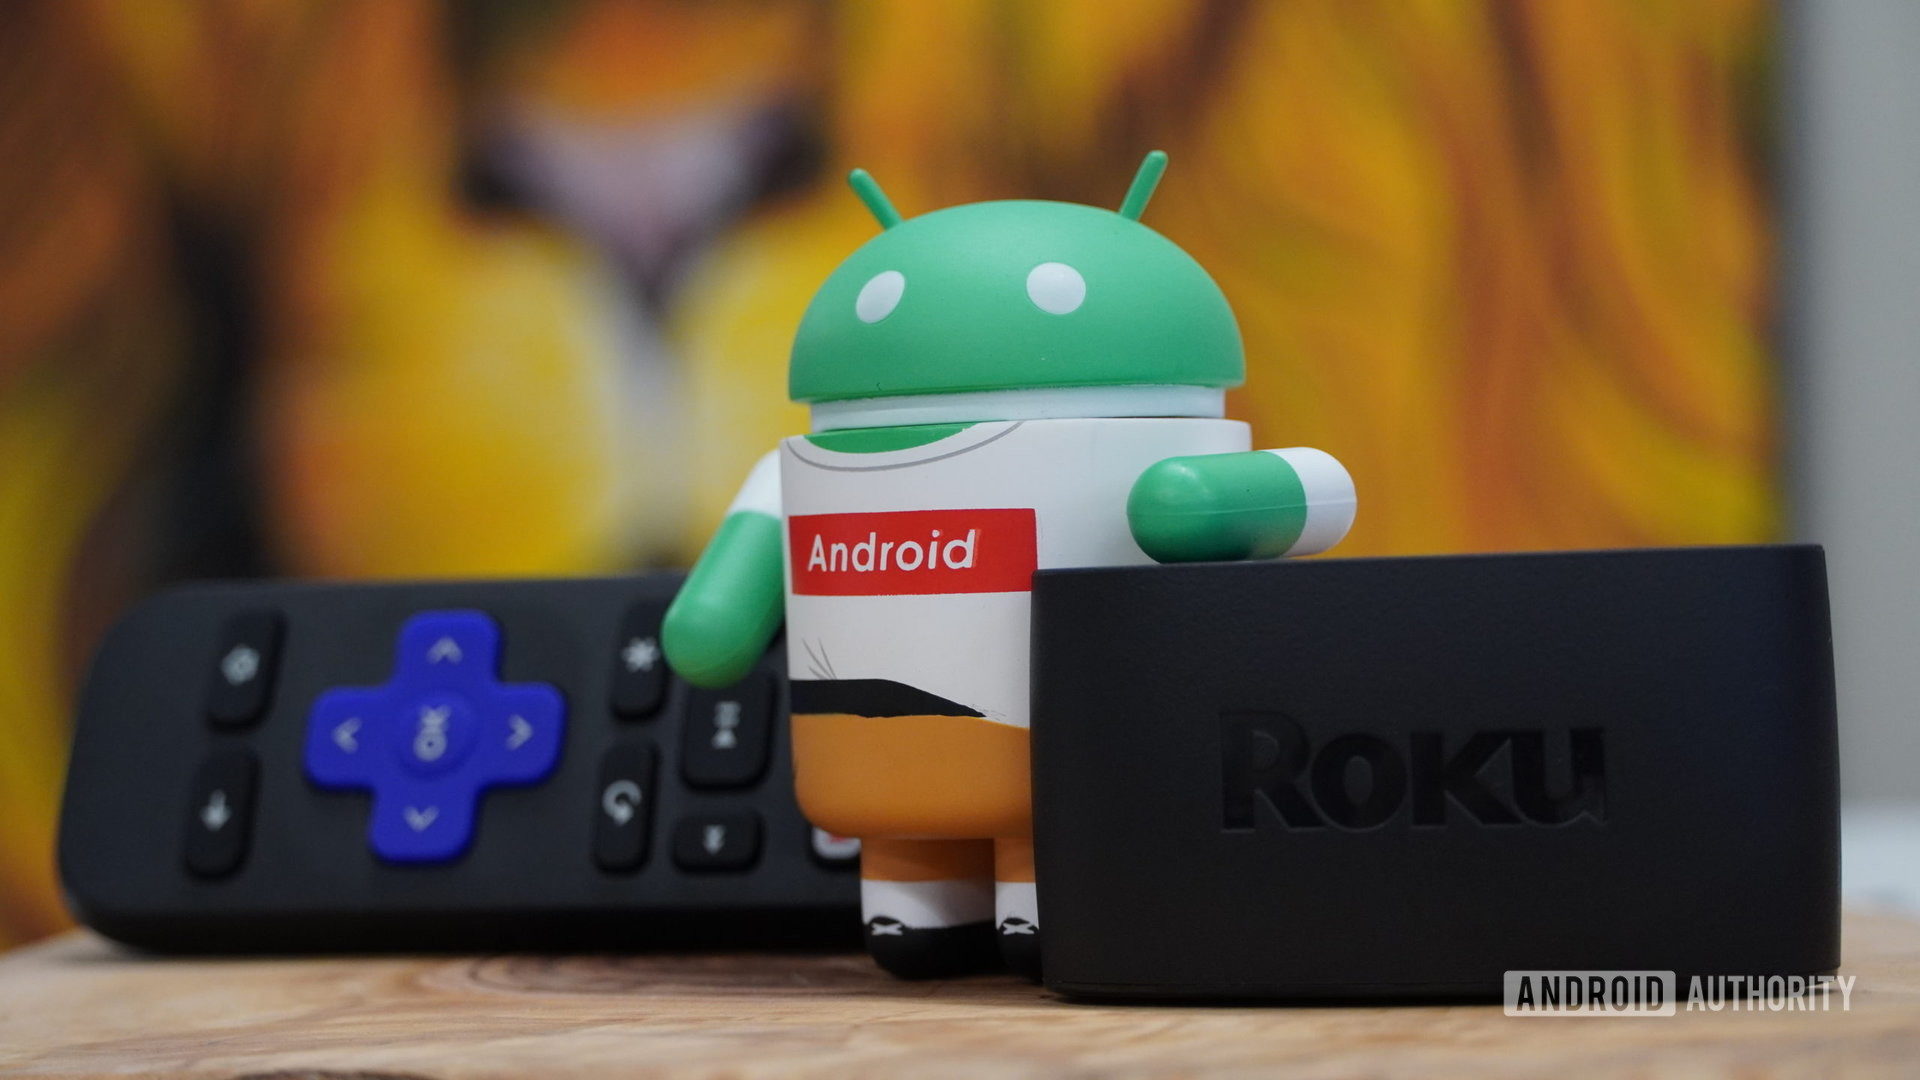 Roku Express with Android figure